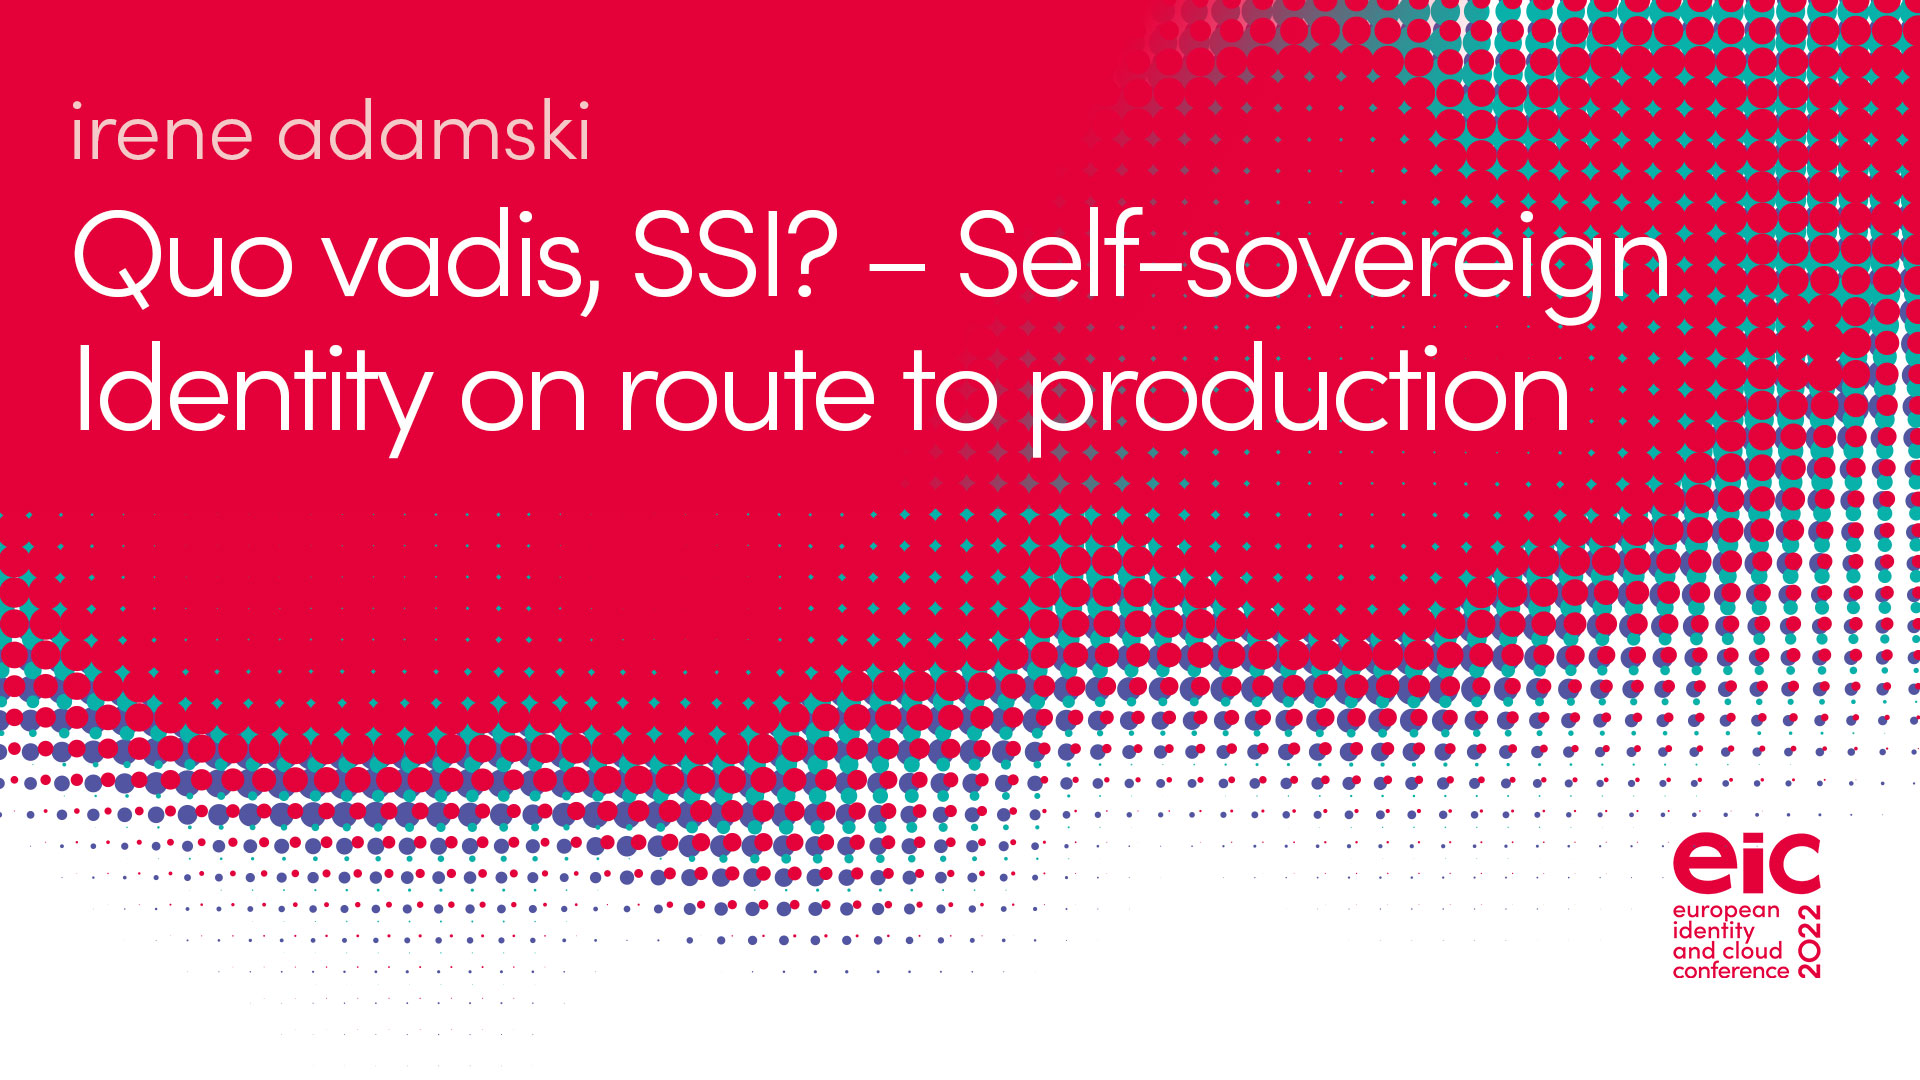 Quo vadis, SSI? – Self-sovereign Identity on route to production